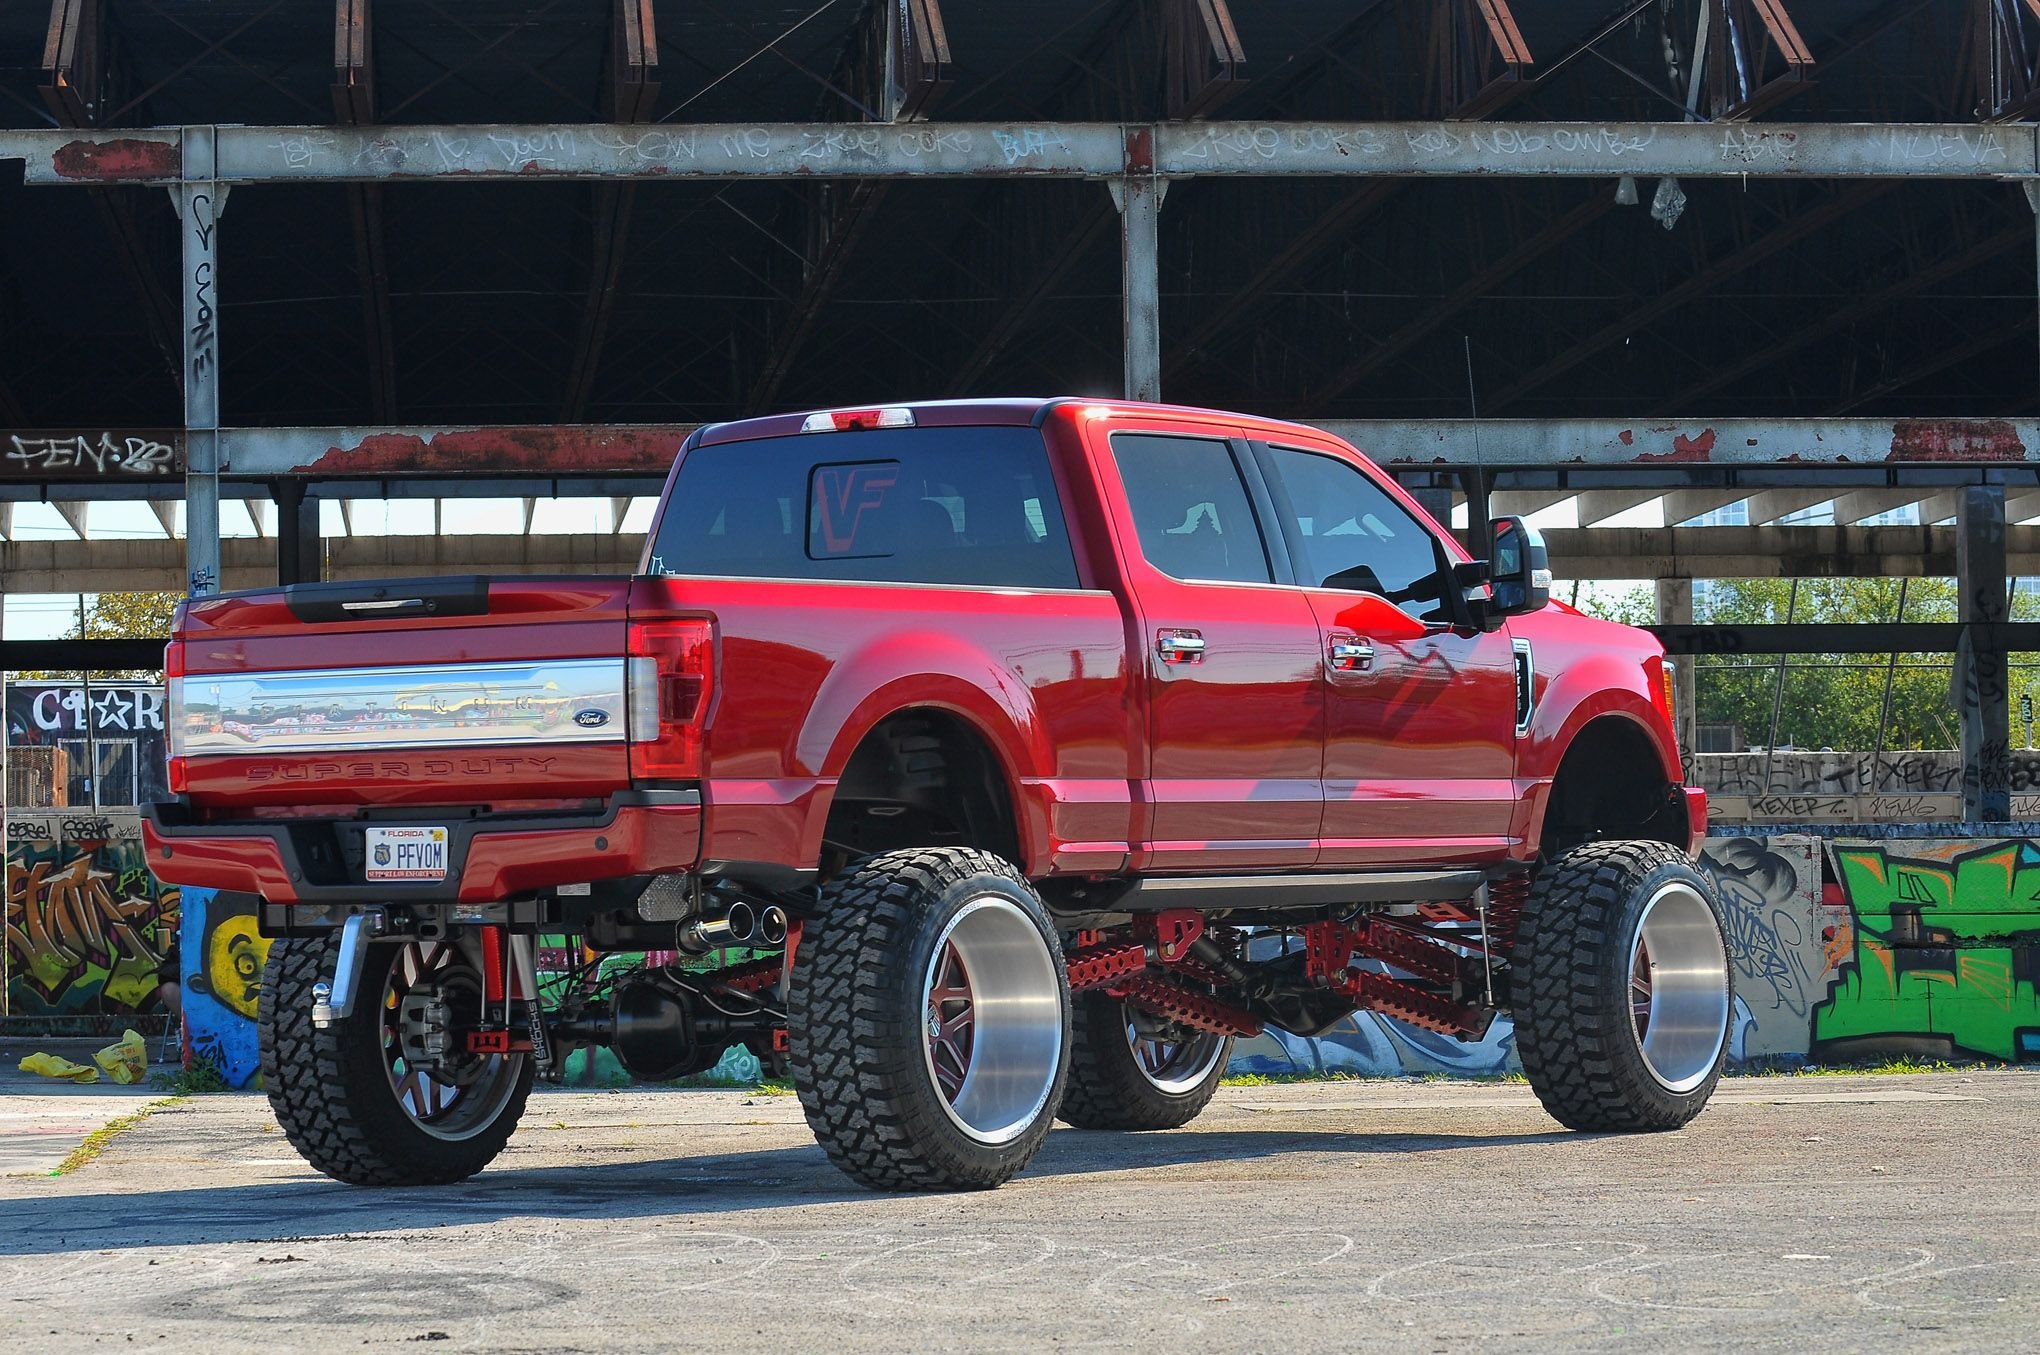 Custom Suspension System on Red Lifted Ford F-250 - Photo by Phil Gordon